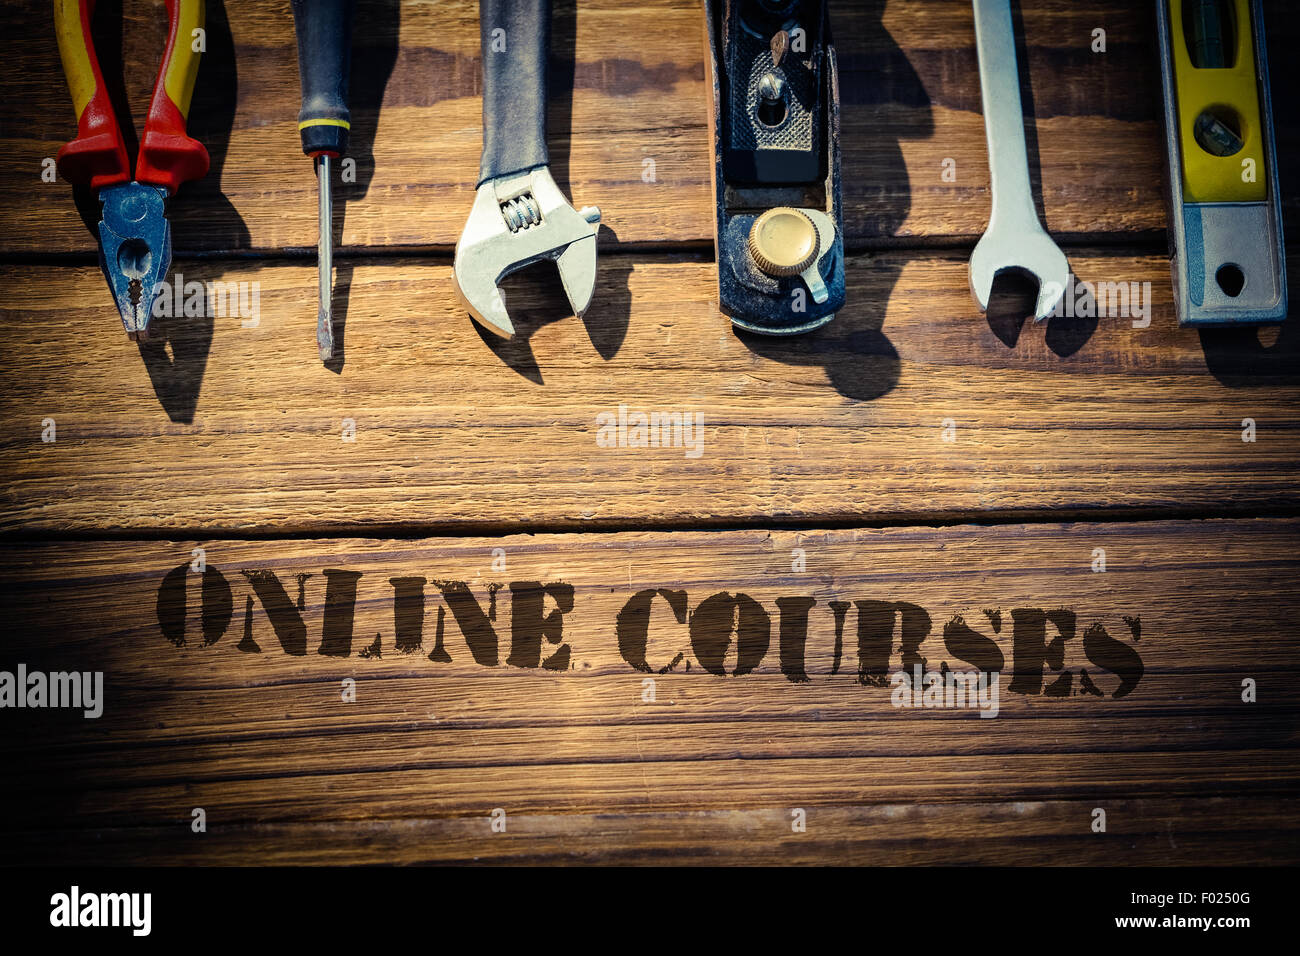 Online courses against desk with tools Stock Photo